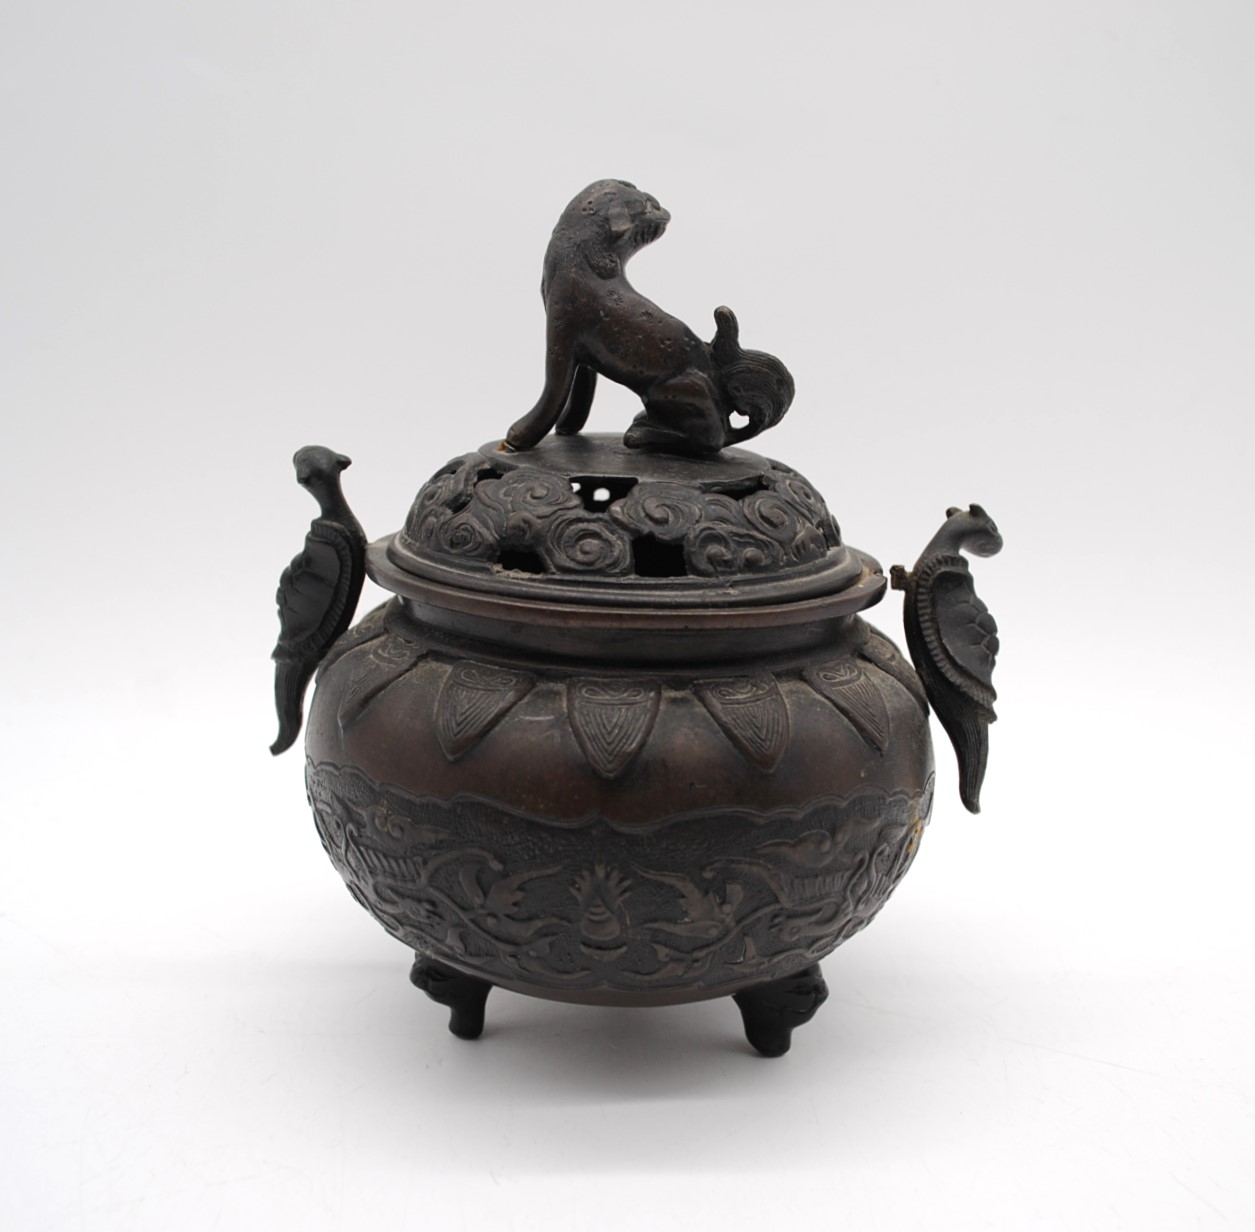 A 19th century oriental bronze twin-handle tripod Censer, with relief decoration depicting dragons - Image 10 of 12